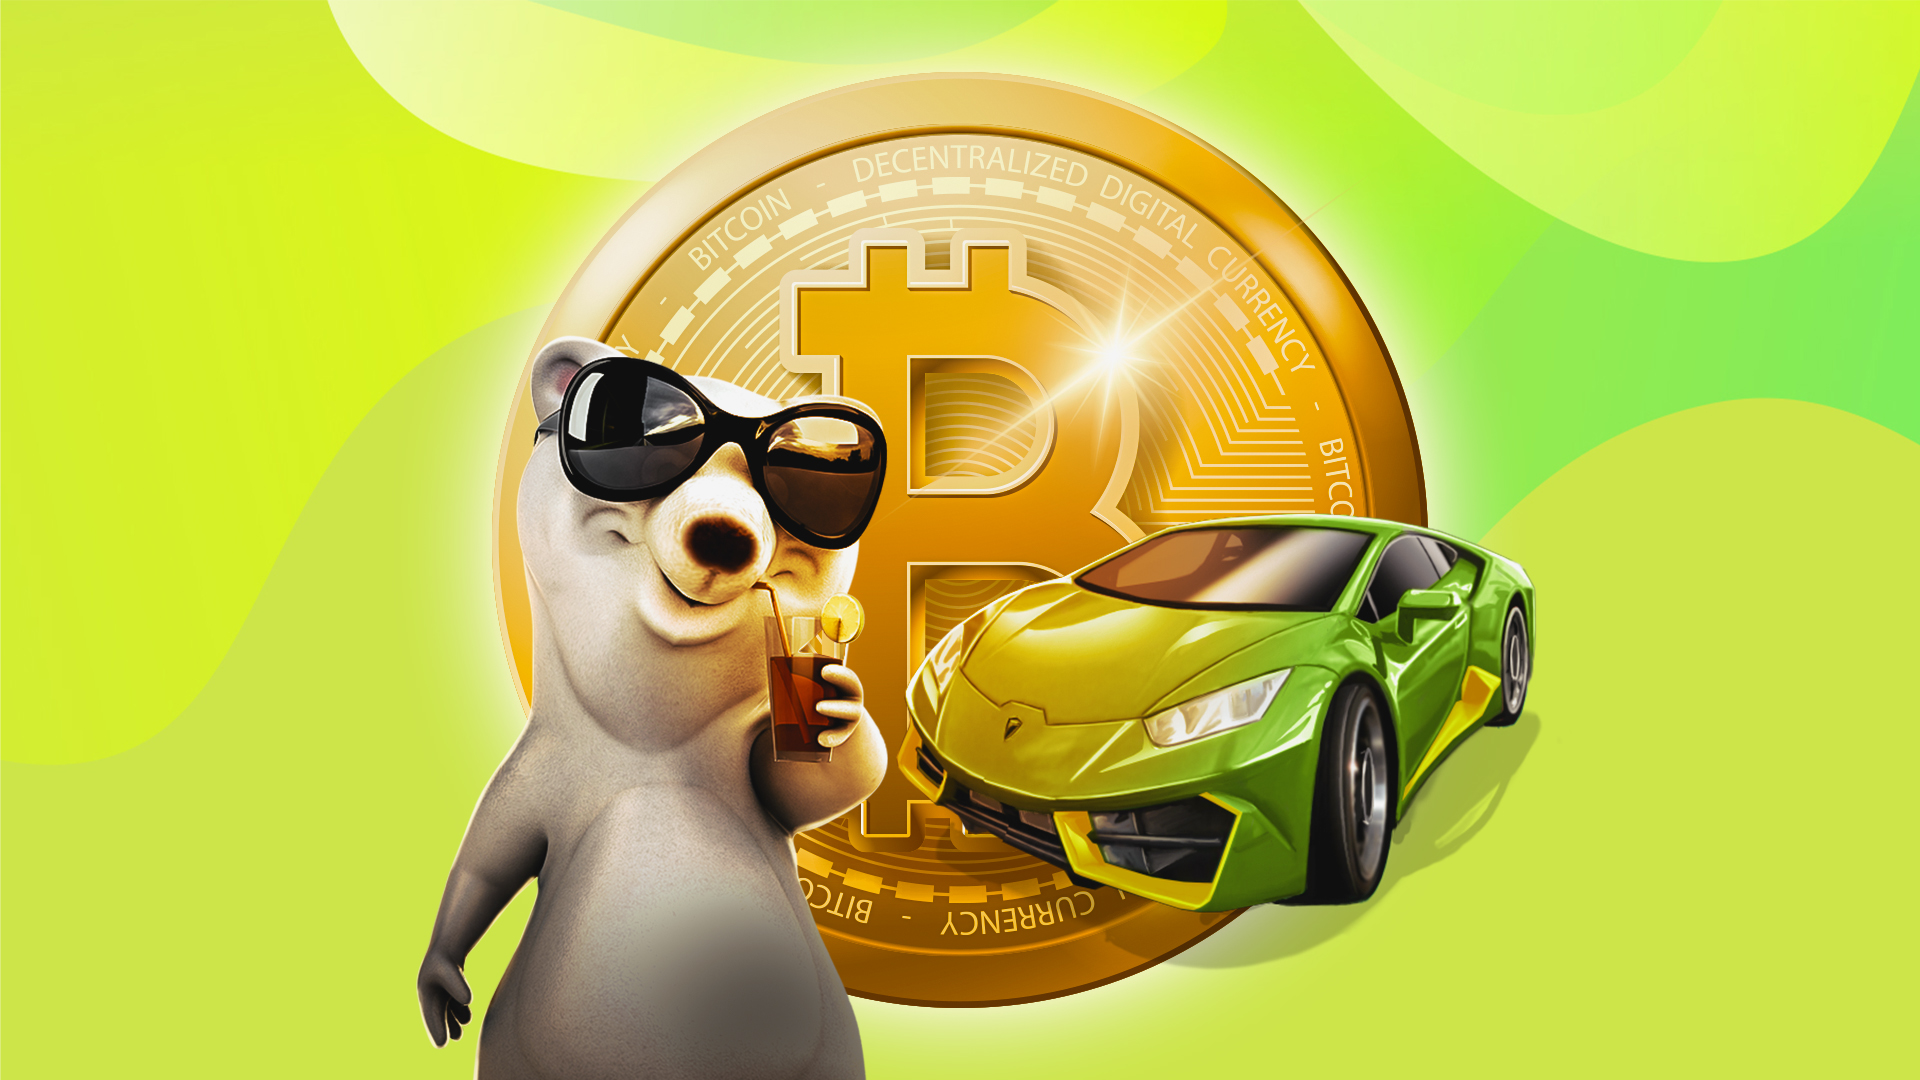 A 3D cartoon polar bear stands in front of a shiny, gold Bitcoin and a green sports car.